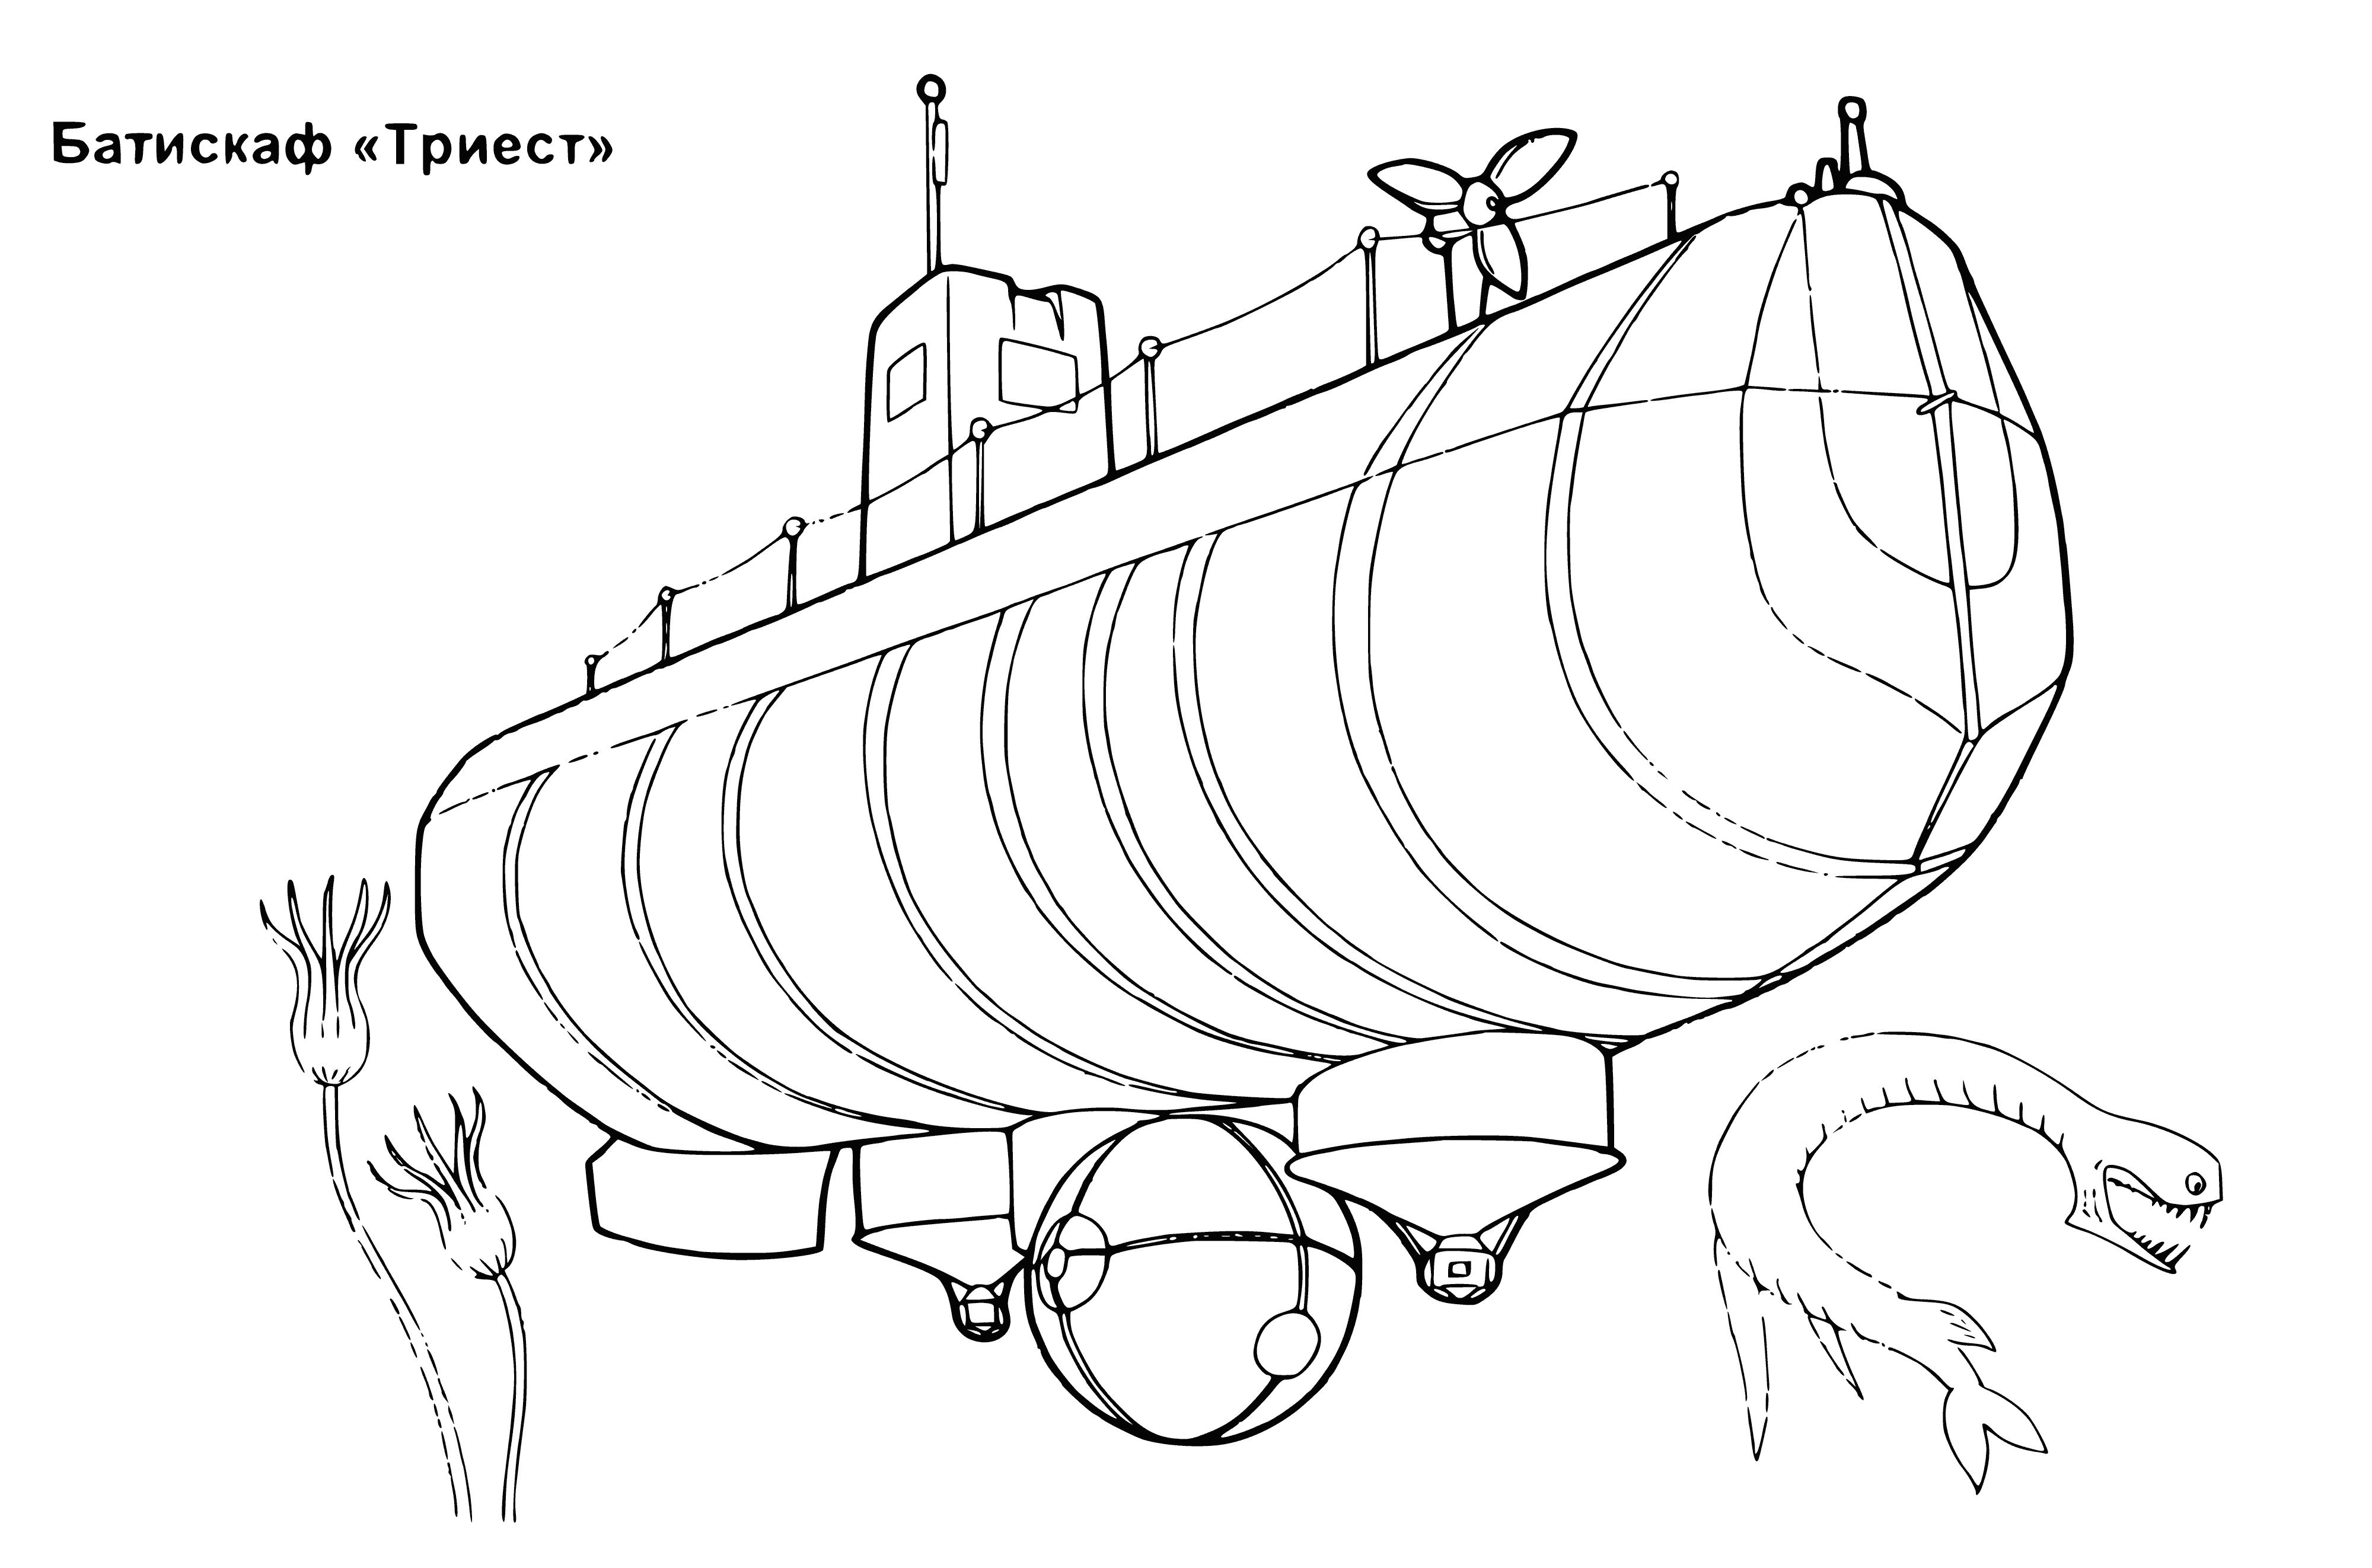 coloring page: Submarine-like vehicle that can fill ballast tanks w/ air/water to adjust sink rate. Explores & studies ocean depths. #Bathyscaphe